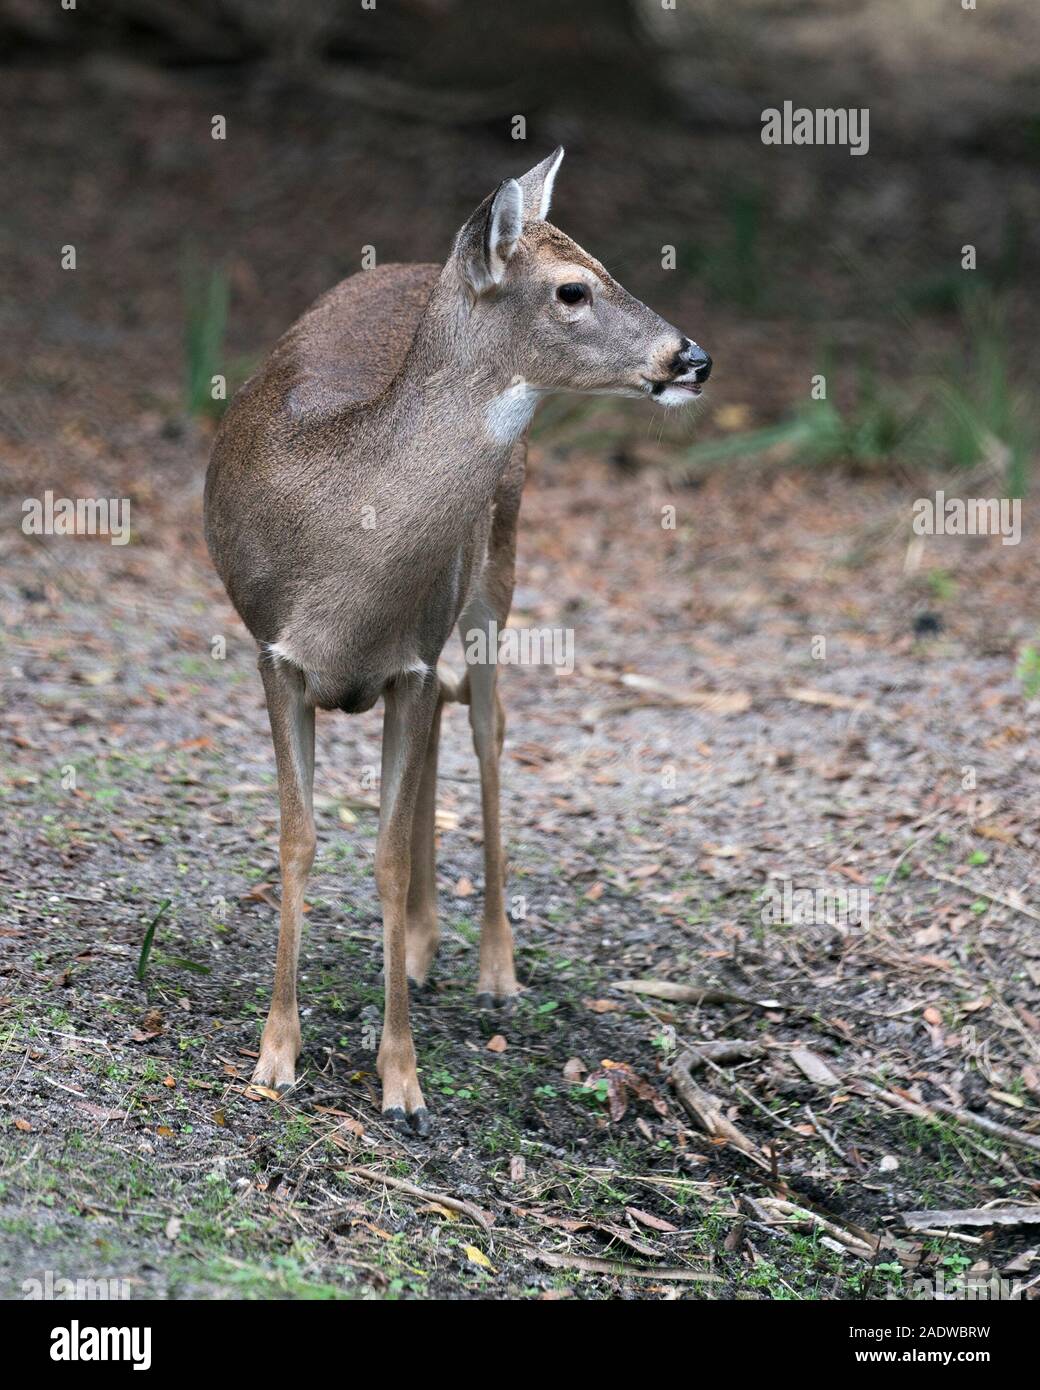 Deer animal White-tailed dear head close-up profile view with bokeh background exposing its head, ears, eye, mouth, nose, brown fur. Stock Photo